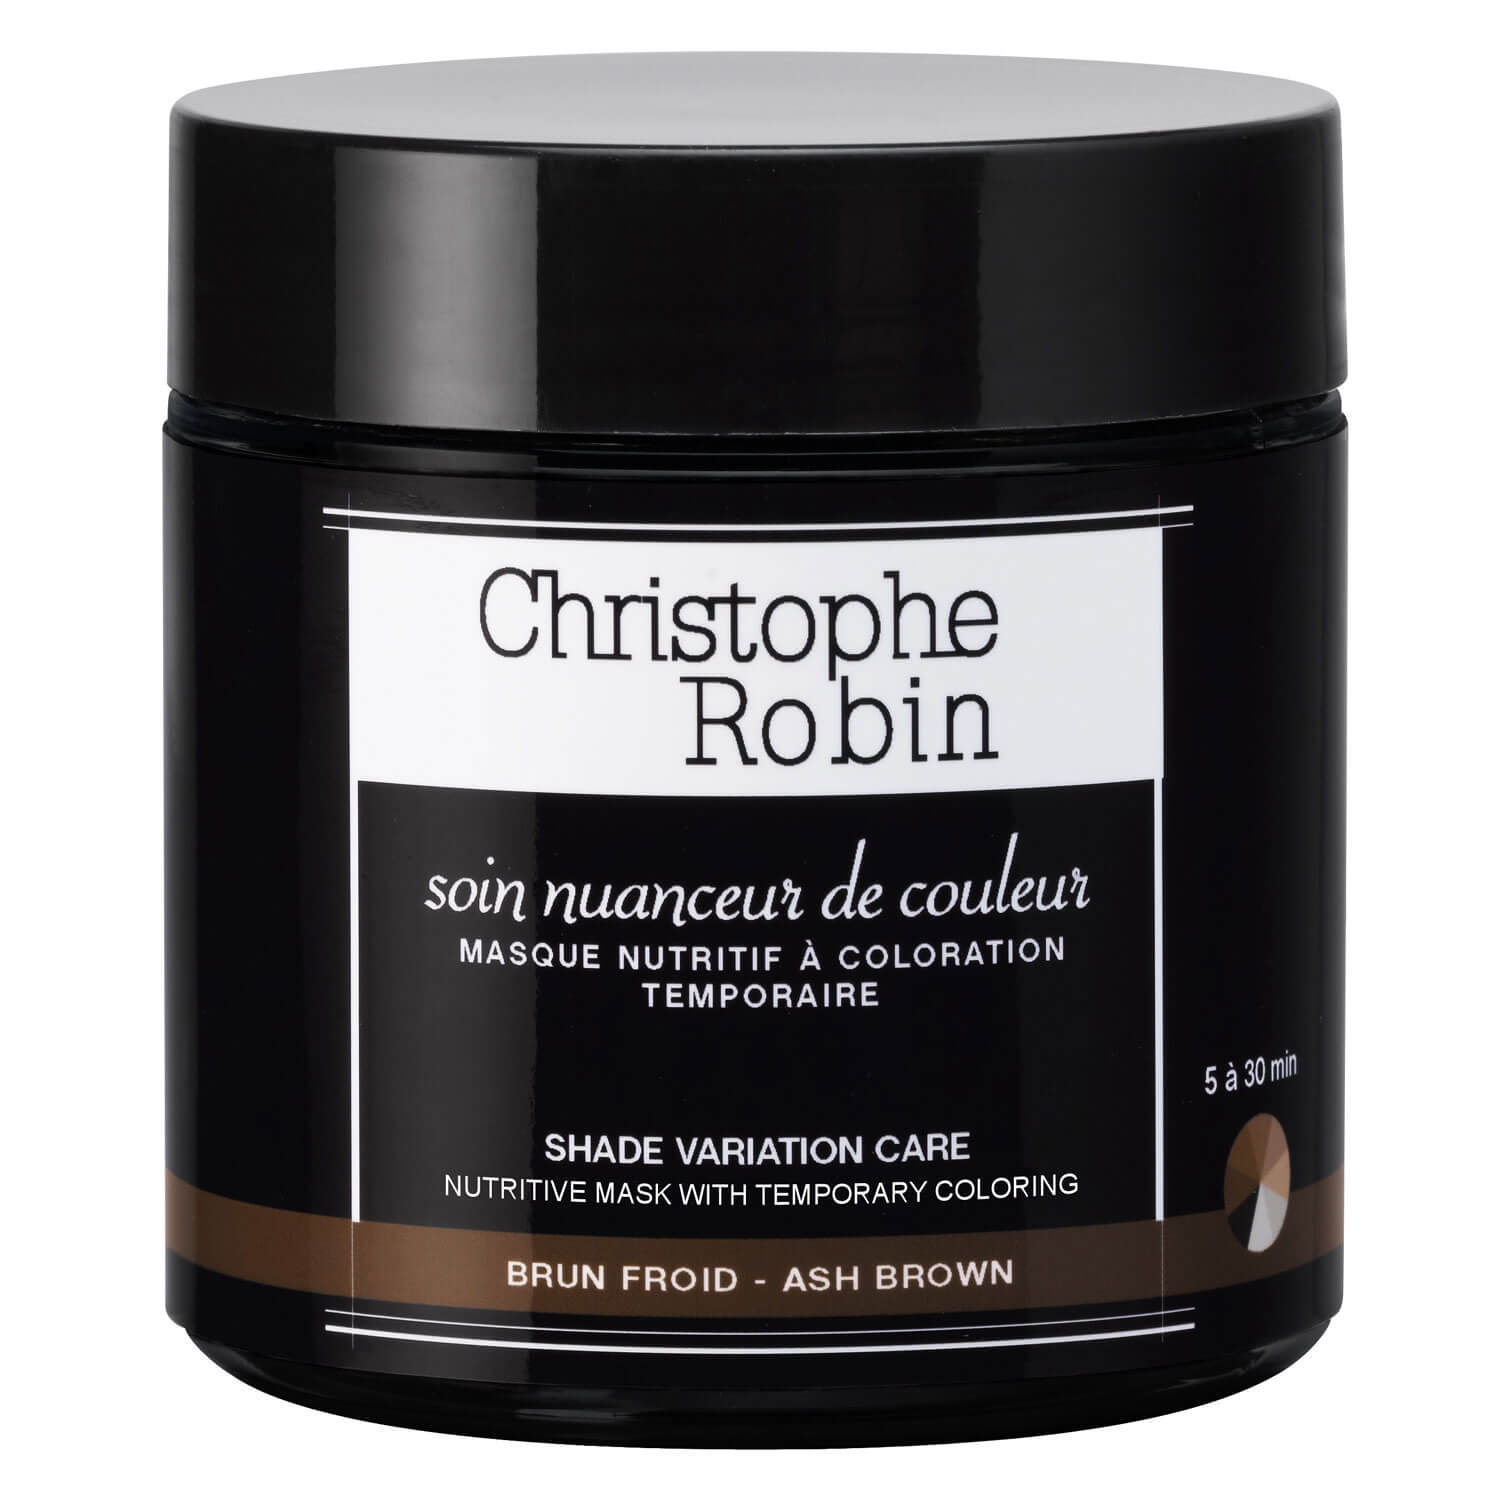 Product image from Christophe Robin - Soin nuanceur de couleur brun froid